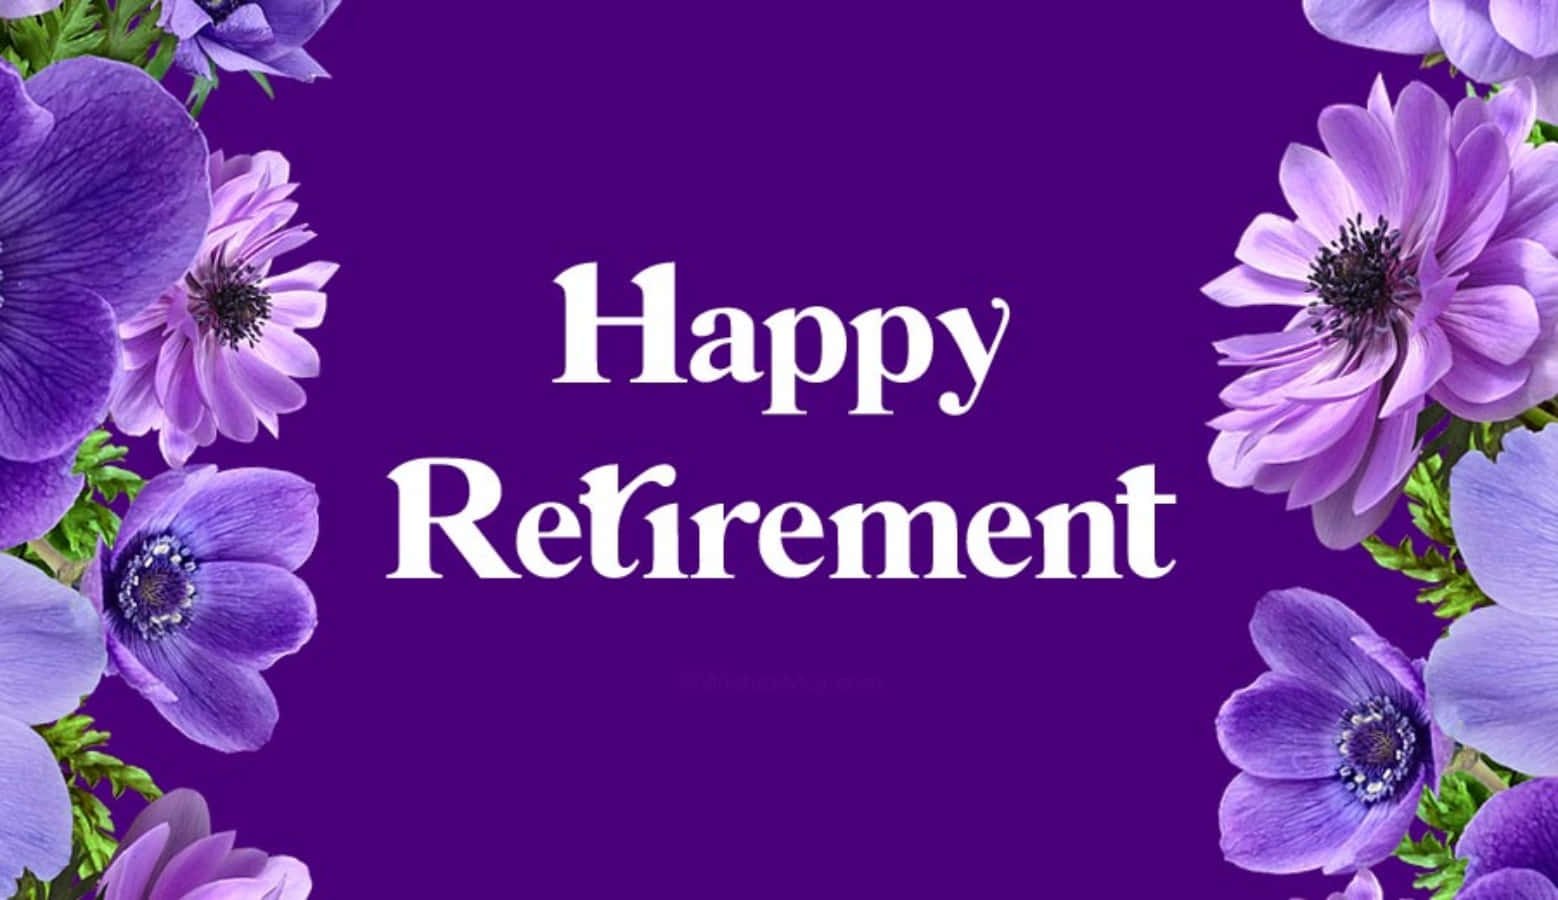 Retirement is here! Welcome the Next Chapter